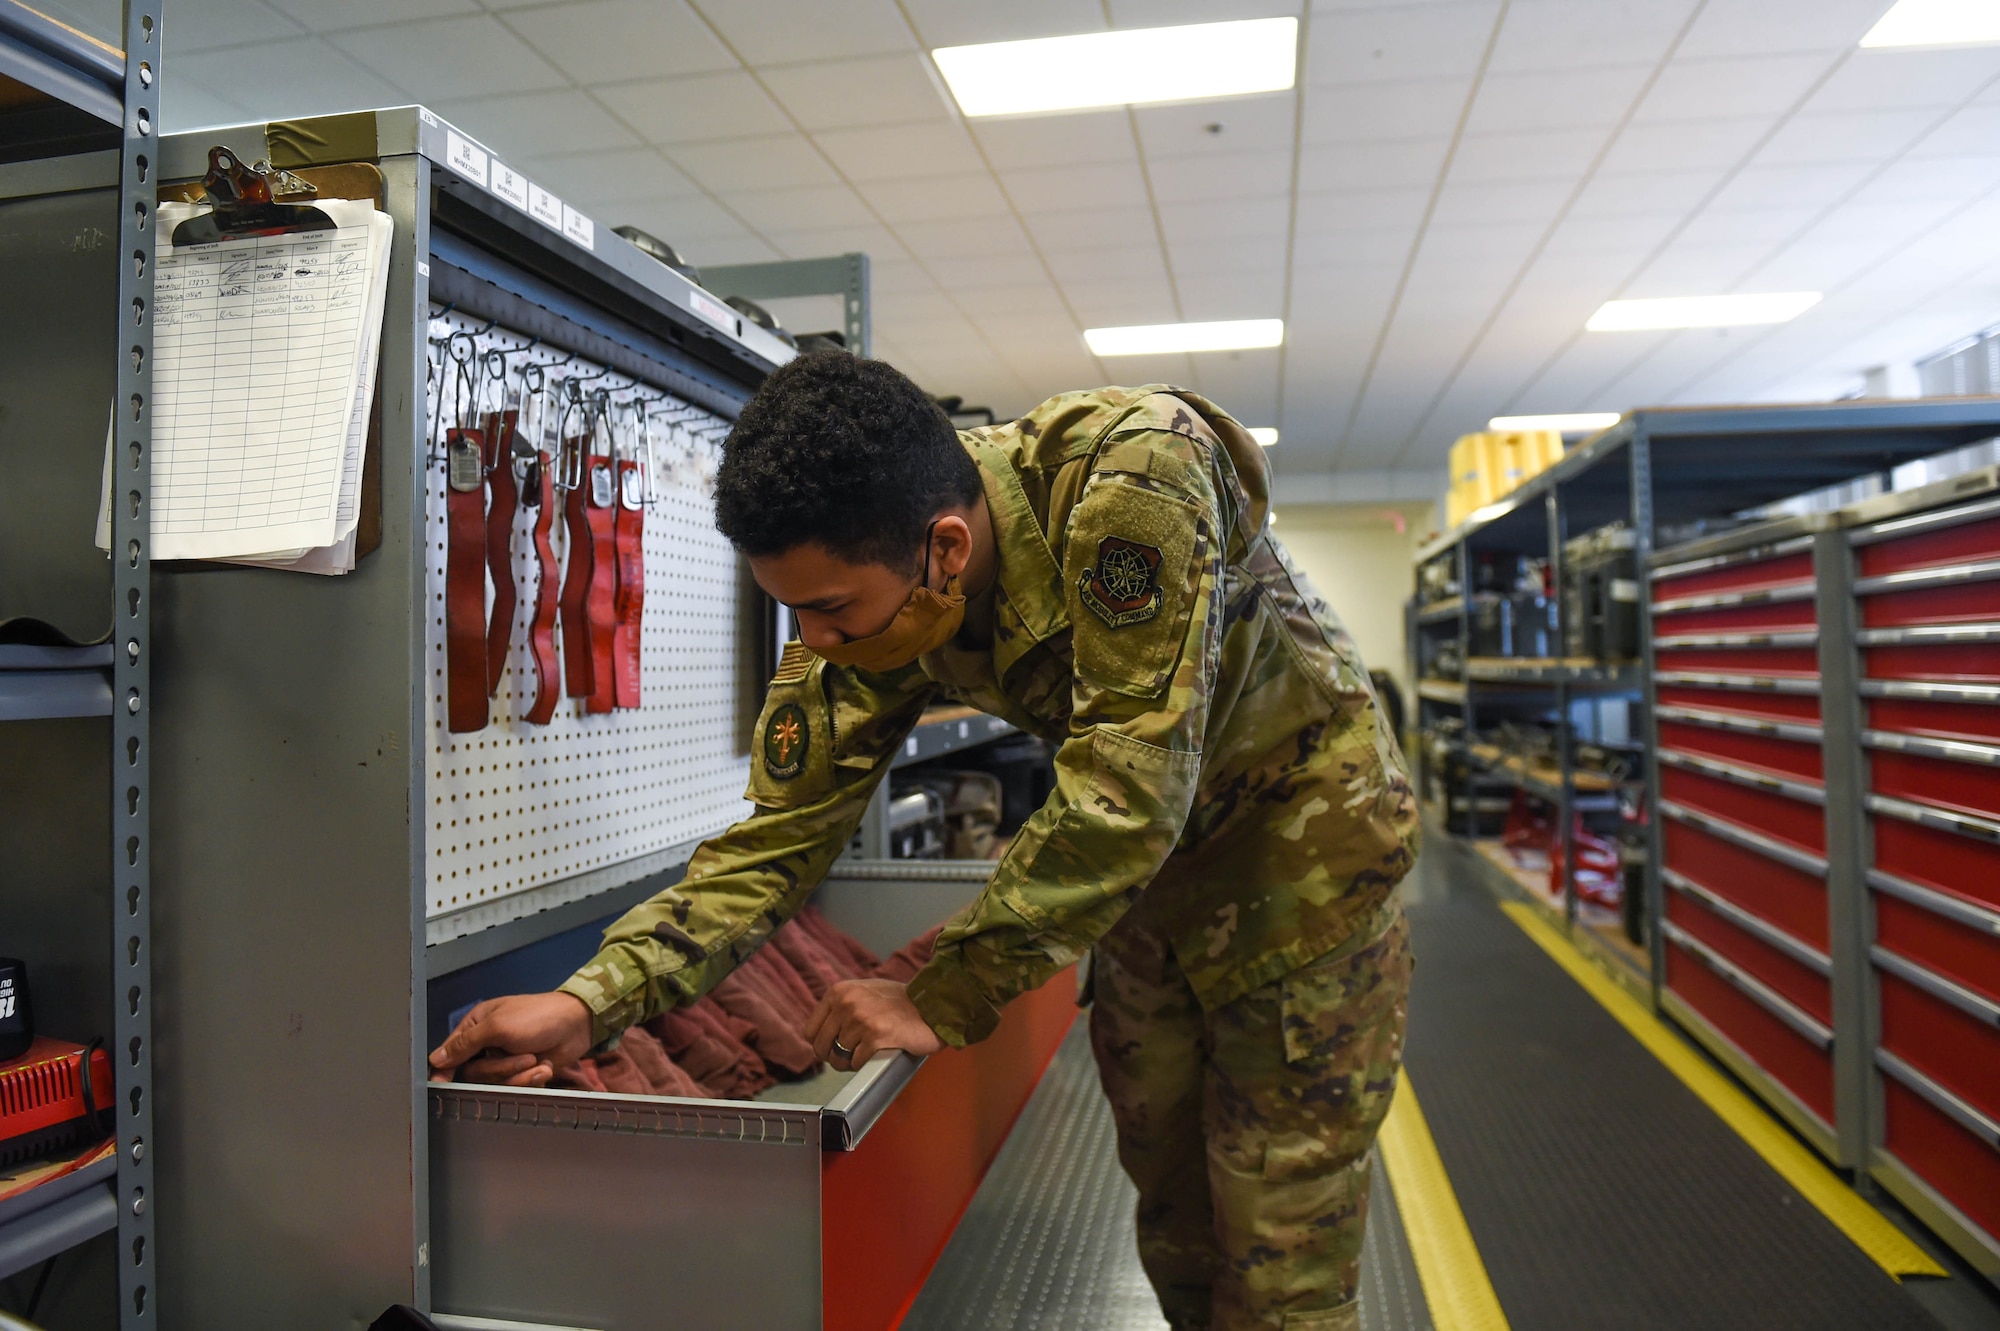 Senior Airman Timothy Shaw, 62nd Maintenance Squadron support section journeyman, checks inventory at the home station check support section on Joint Base Lewis-McChord, Wash., May 20, 2020. The support section provides tools and equipment to maintenance personnel who work on the aircrafts. (U.S. Air Force photo by Airman 1st Class Mikayla Heineck)